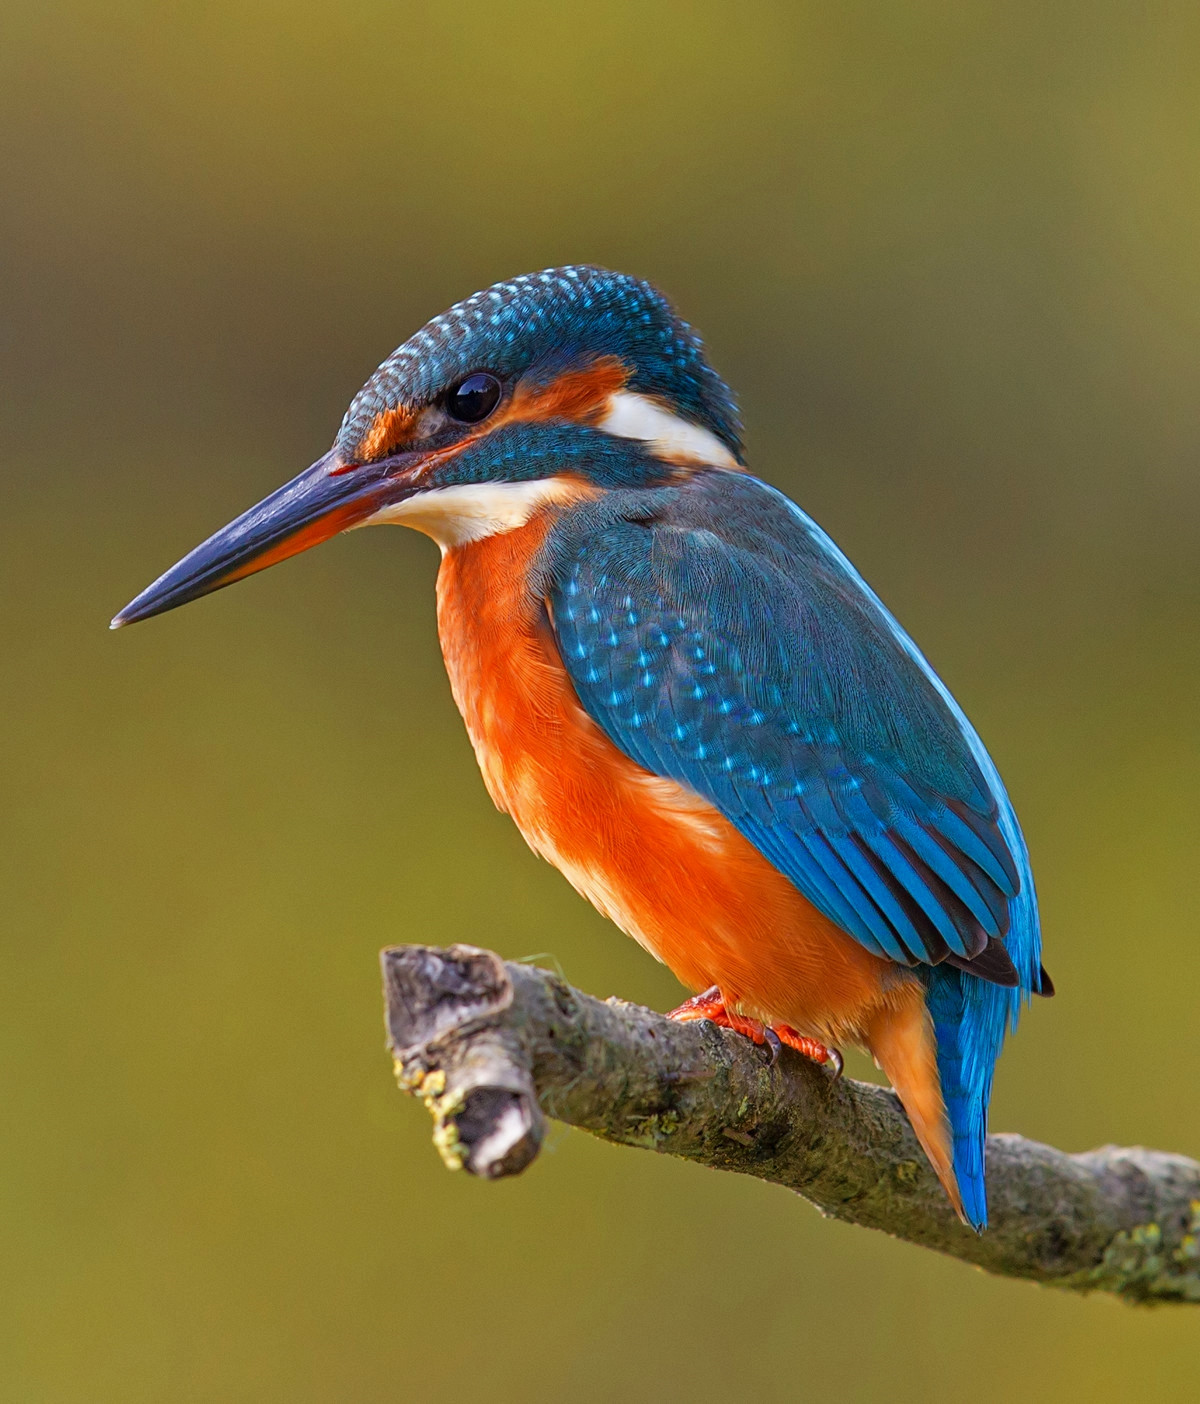 Kingfisher. Credit Andreas Trepte